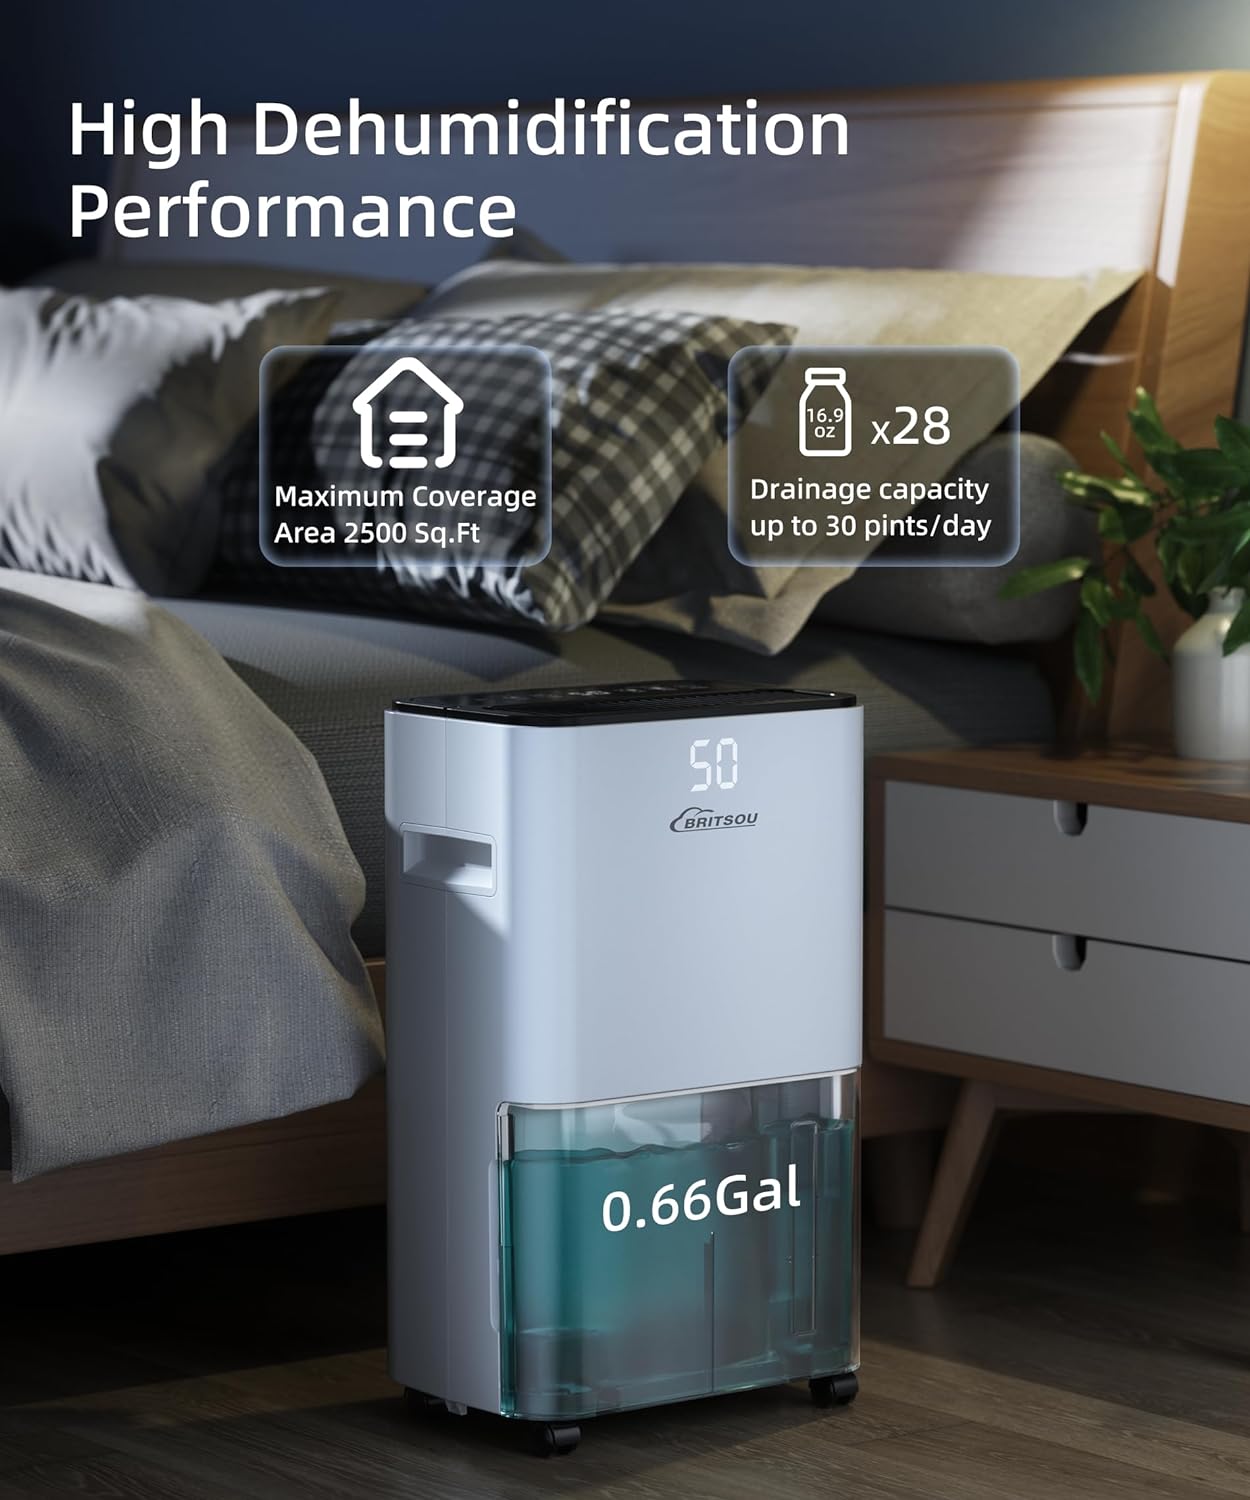 Dehumidifier 2500 Sq. Ft 30 Pint BRITSOU Dehumidifiers for Home Basements Bedroom Bathroom with Drain Hose | Quiet Dehumidifier for Medium to Large Room | Dry Clothes Mode | Intelligent Humidity Control with 24HR Timer